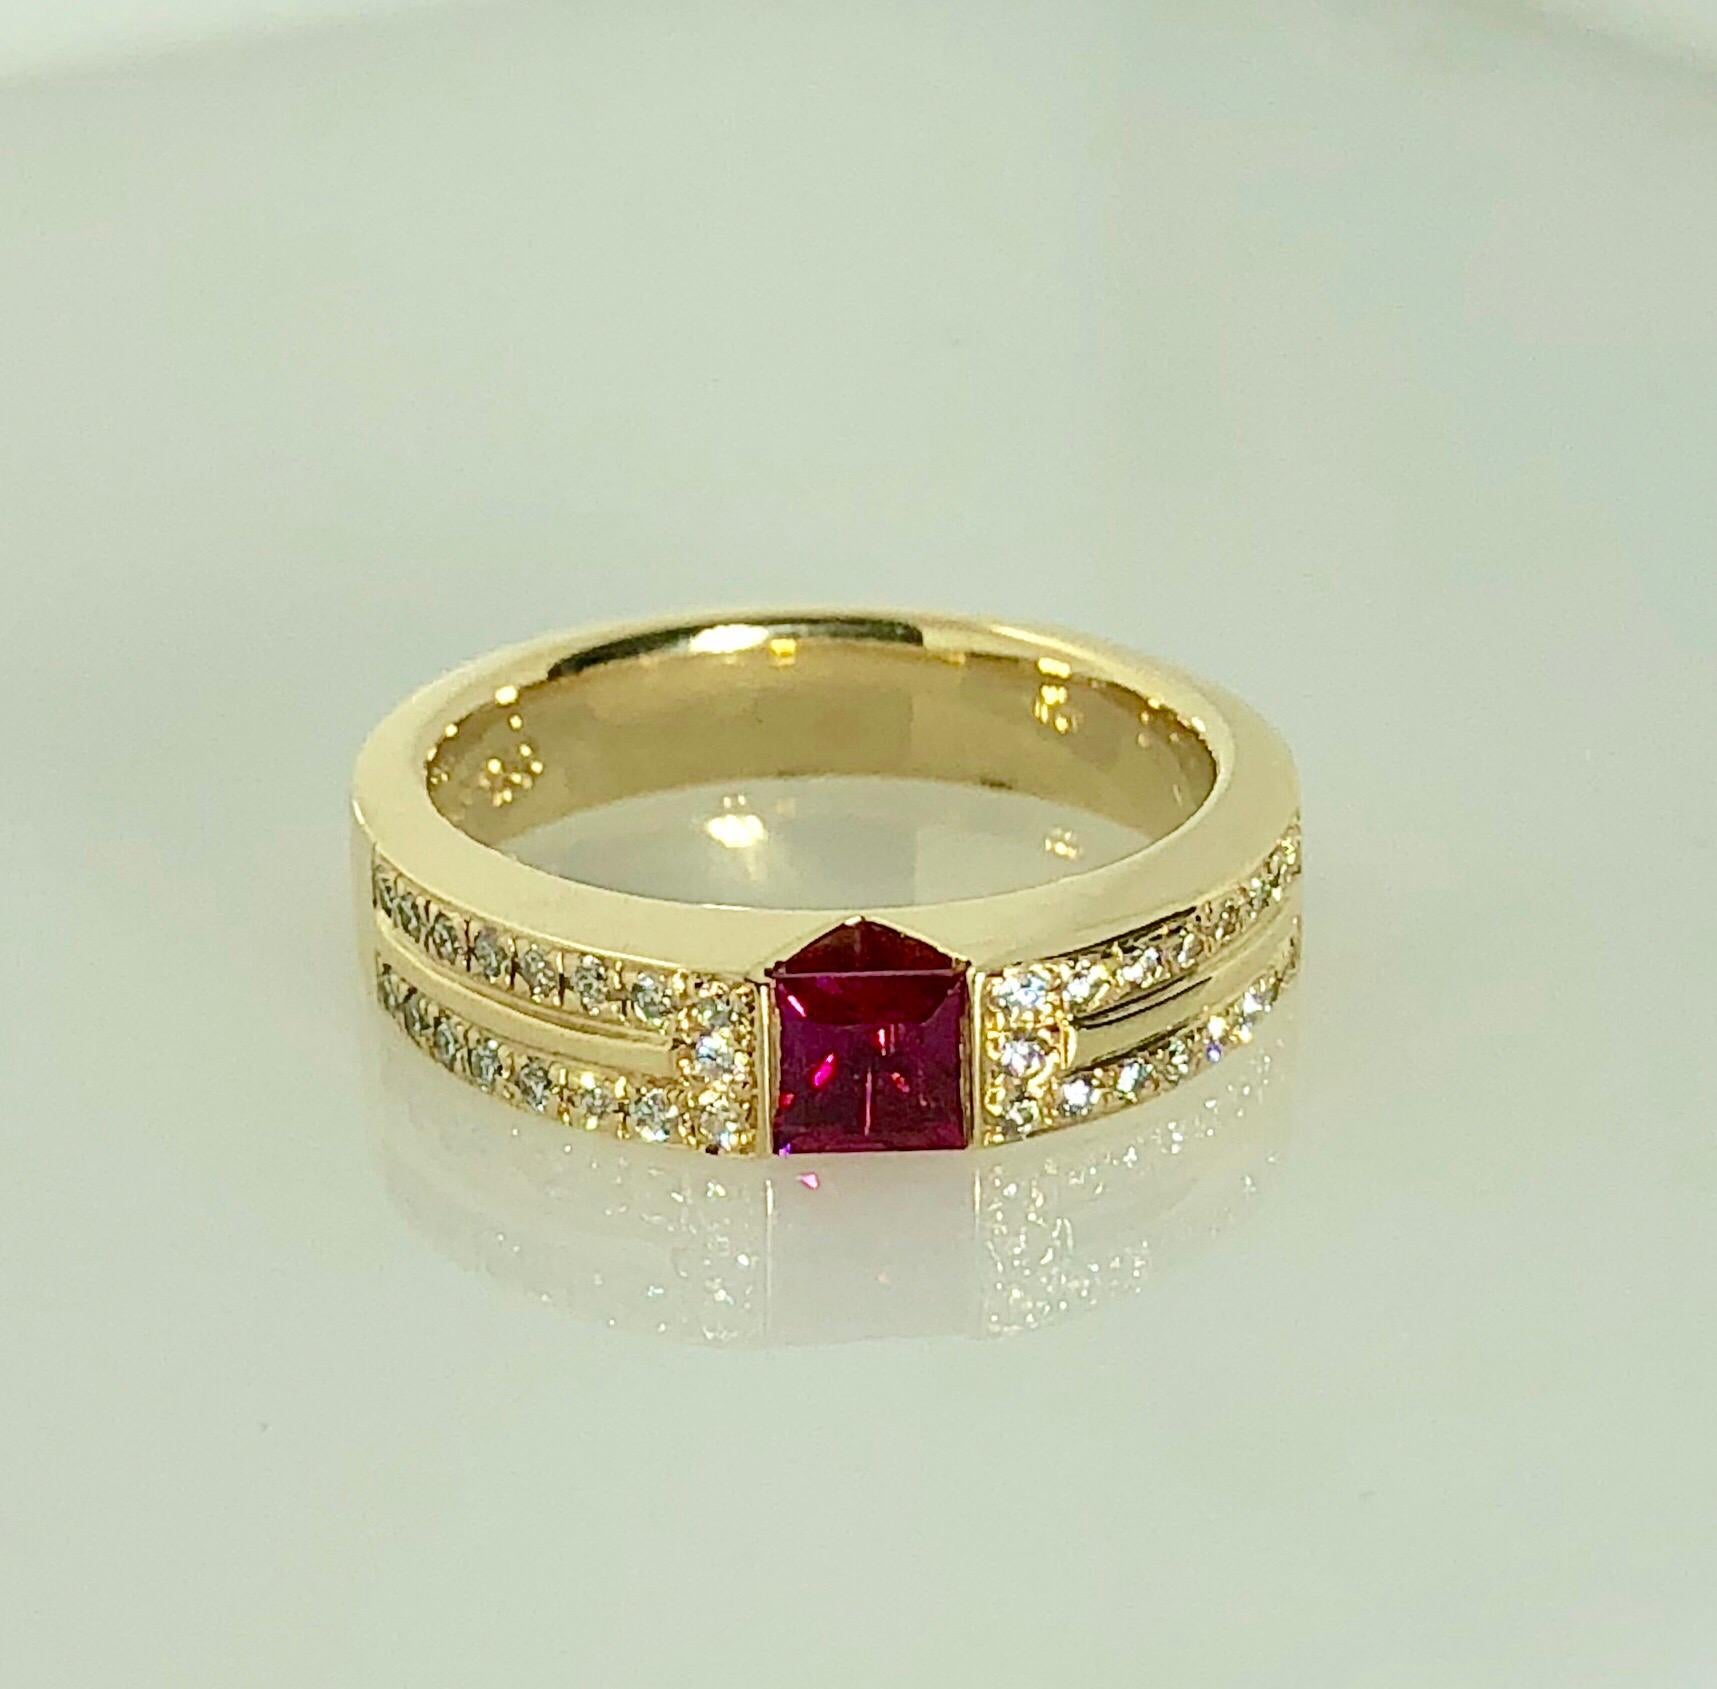 Women's or Men's Carelle 18 Karat Yellow Gold Diamond and Ruby Contemporary Ring